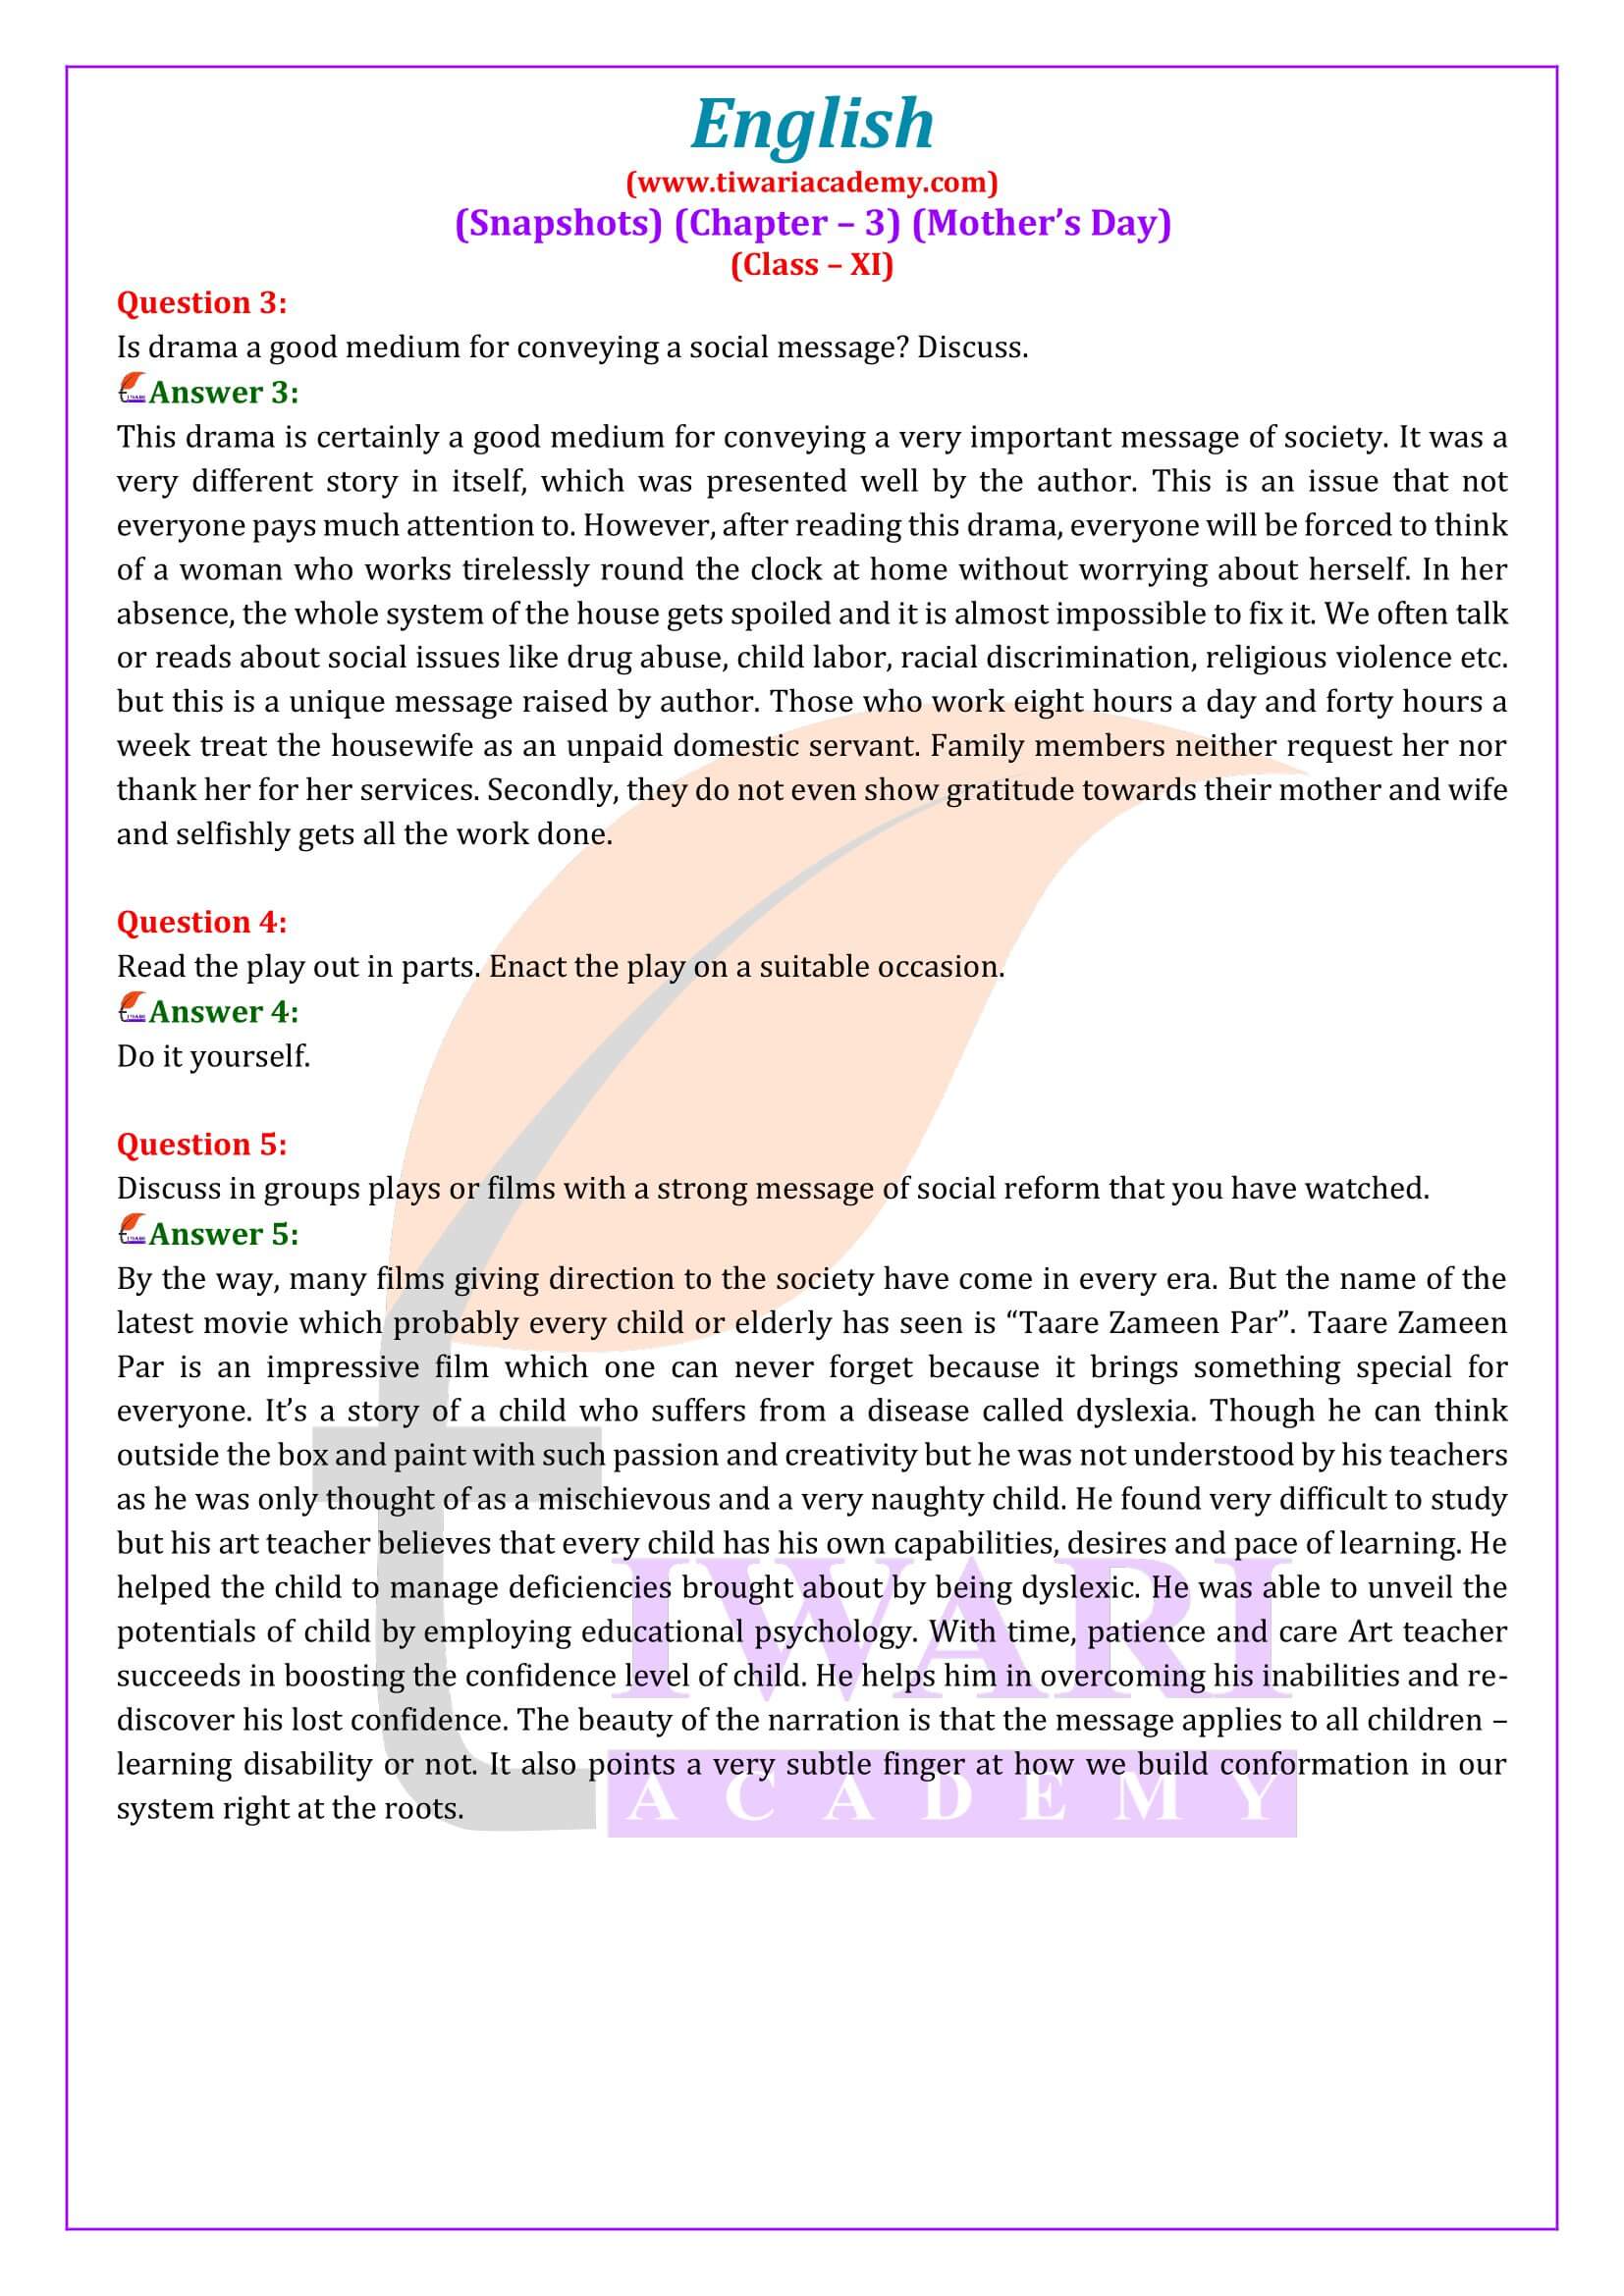 NCERT Solutions for Class 11 English Snapshots Chapter 3